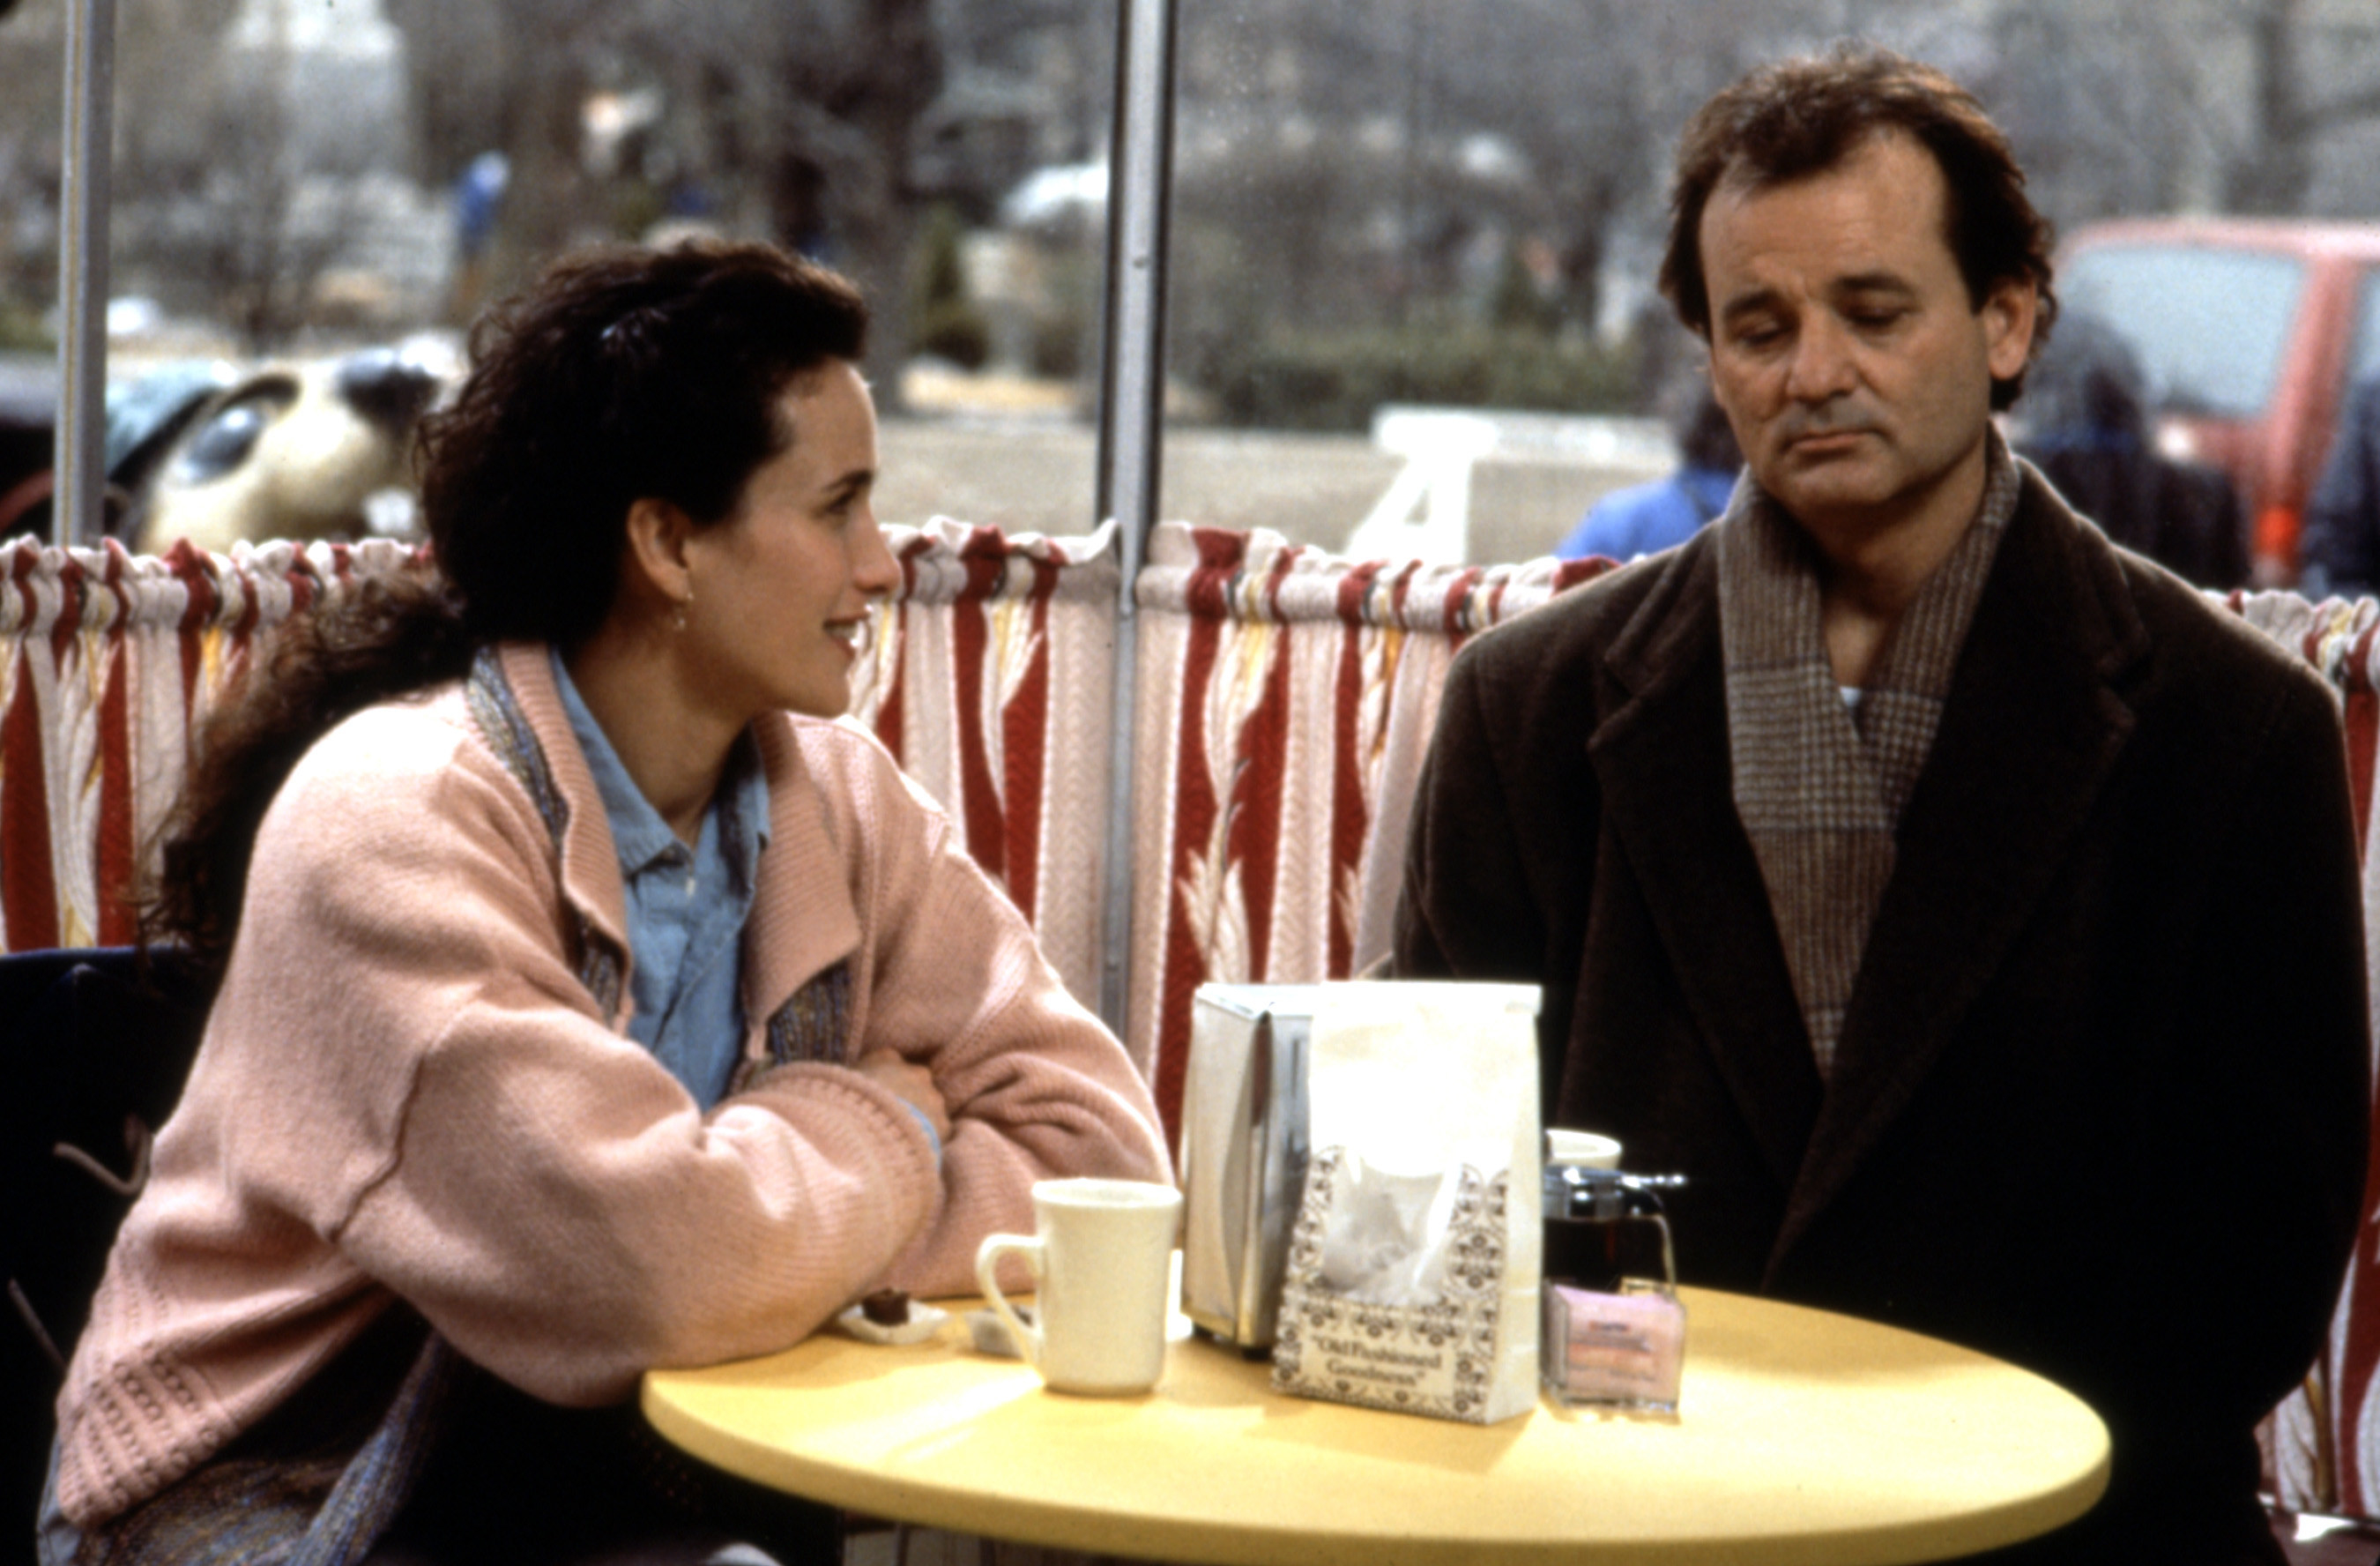 bill murray in the movie at the diner